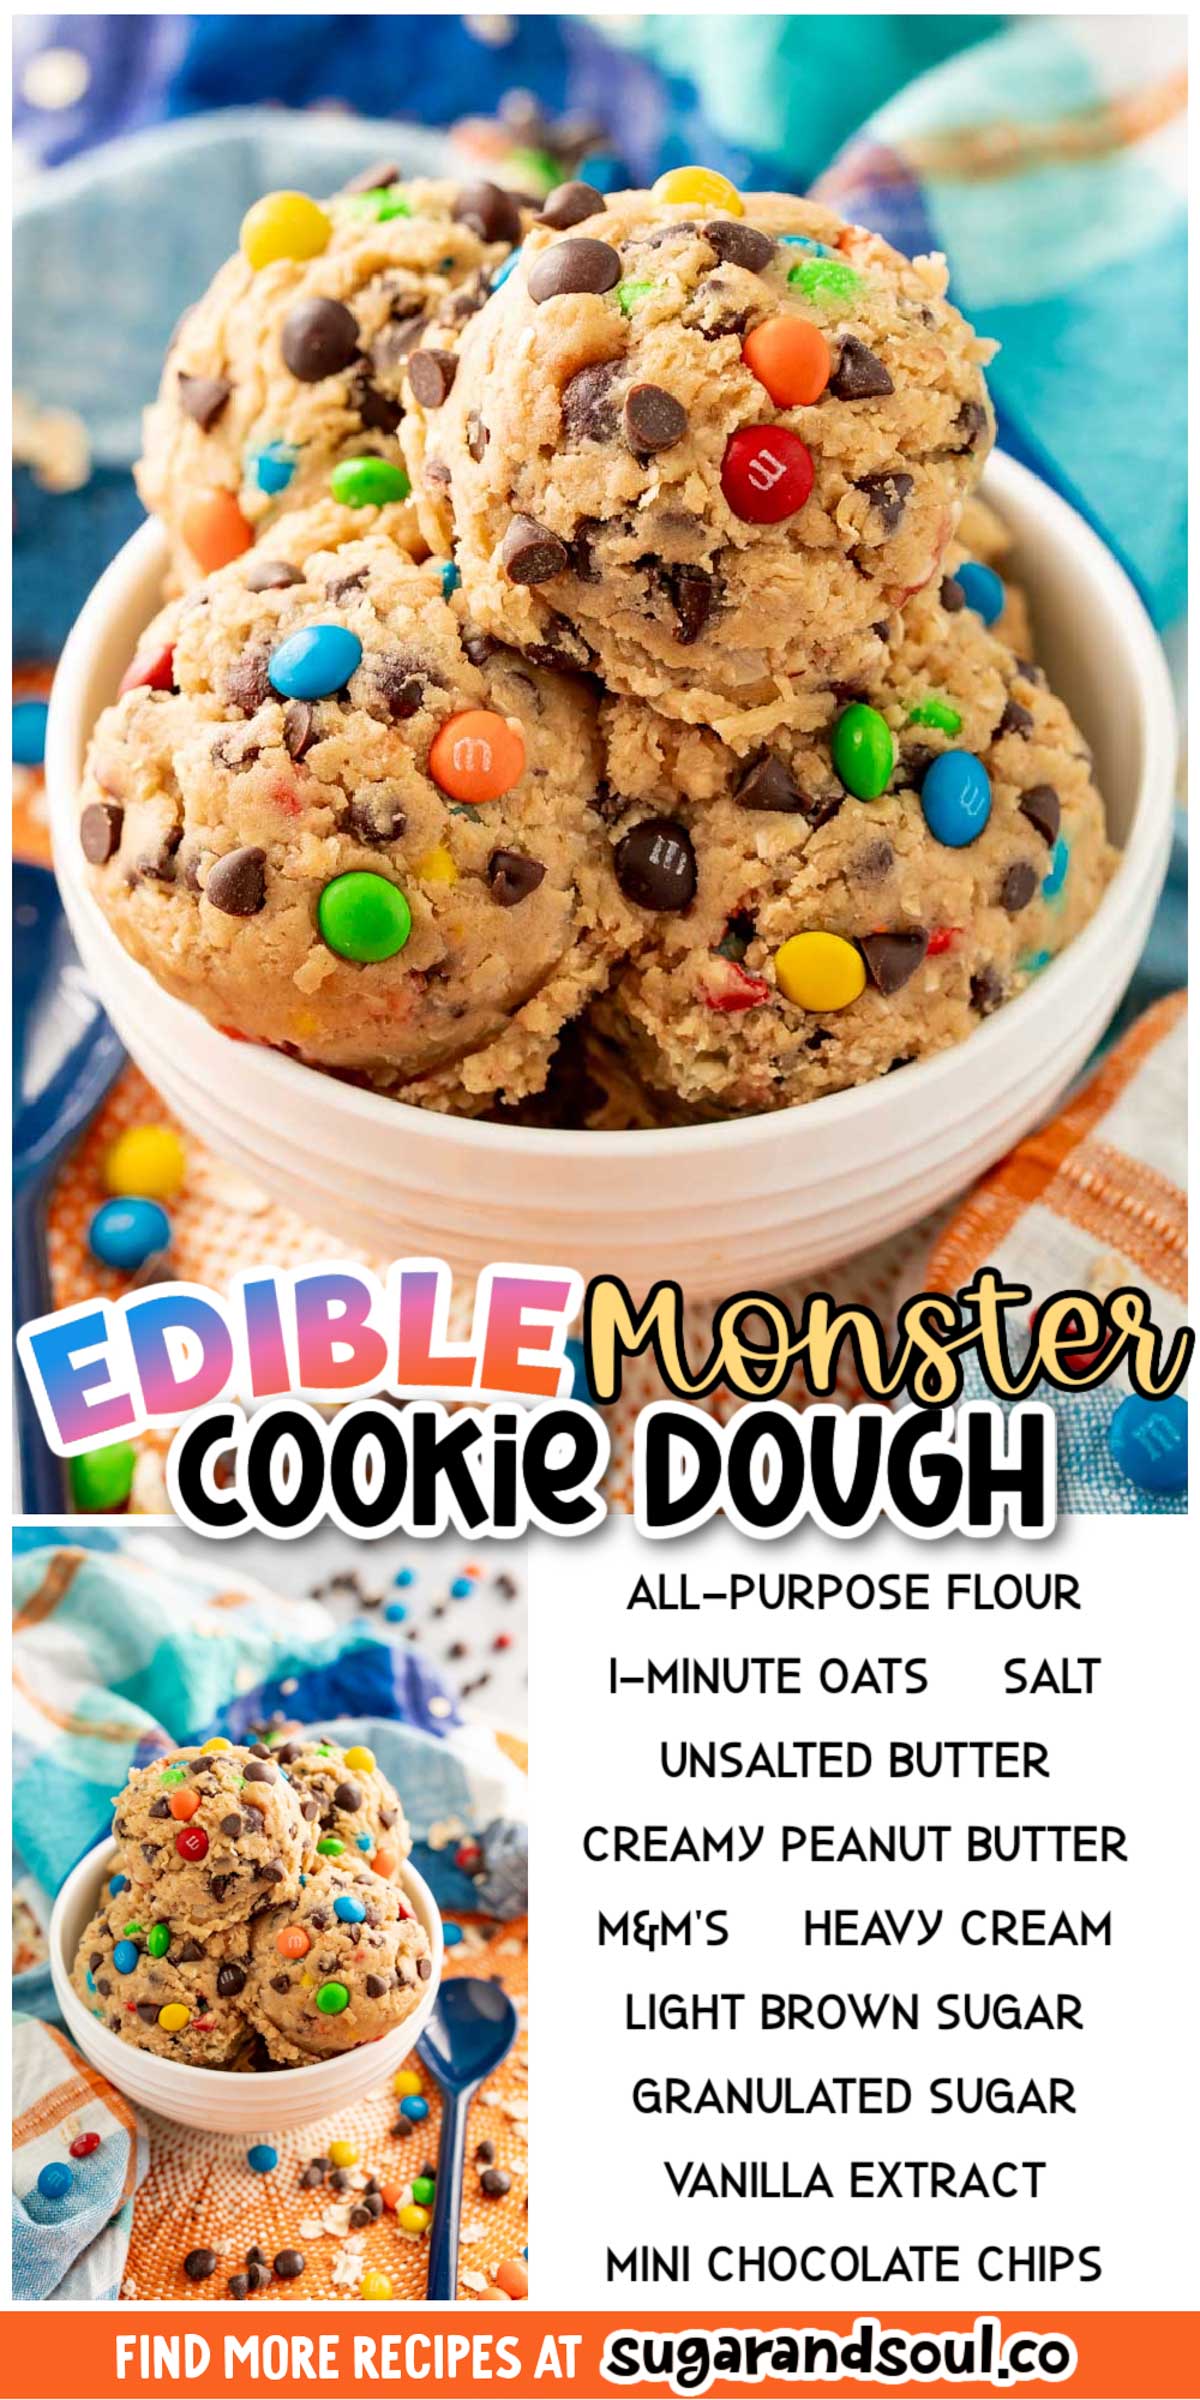 Edible Monster Cookie Dough is an eggless no-bake recipe that's made with heat-treated flour for an easy dessert that's ready in only 10 minutes! The perfect sweet treat for sharing or enjoying as a late-night snack! via @sugarandsoulco